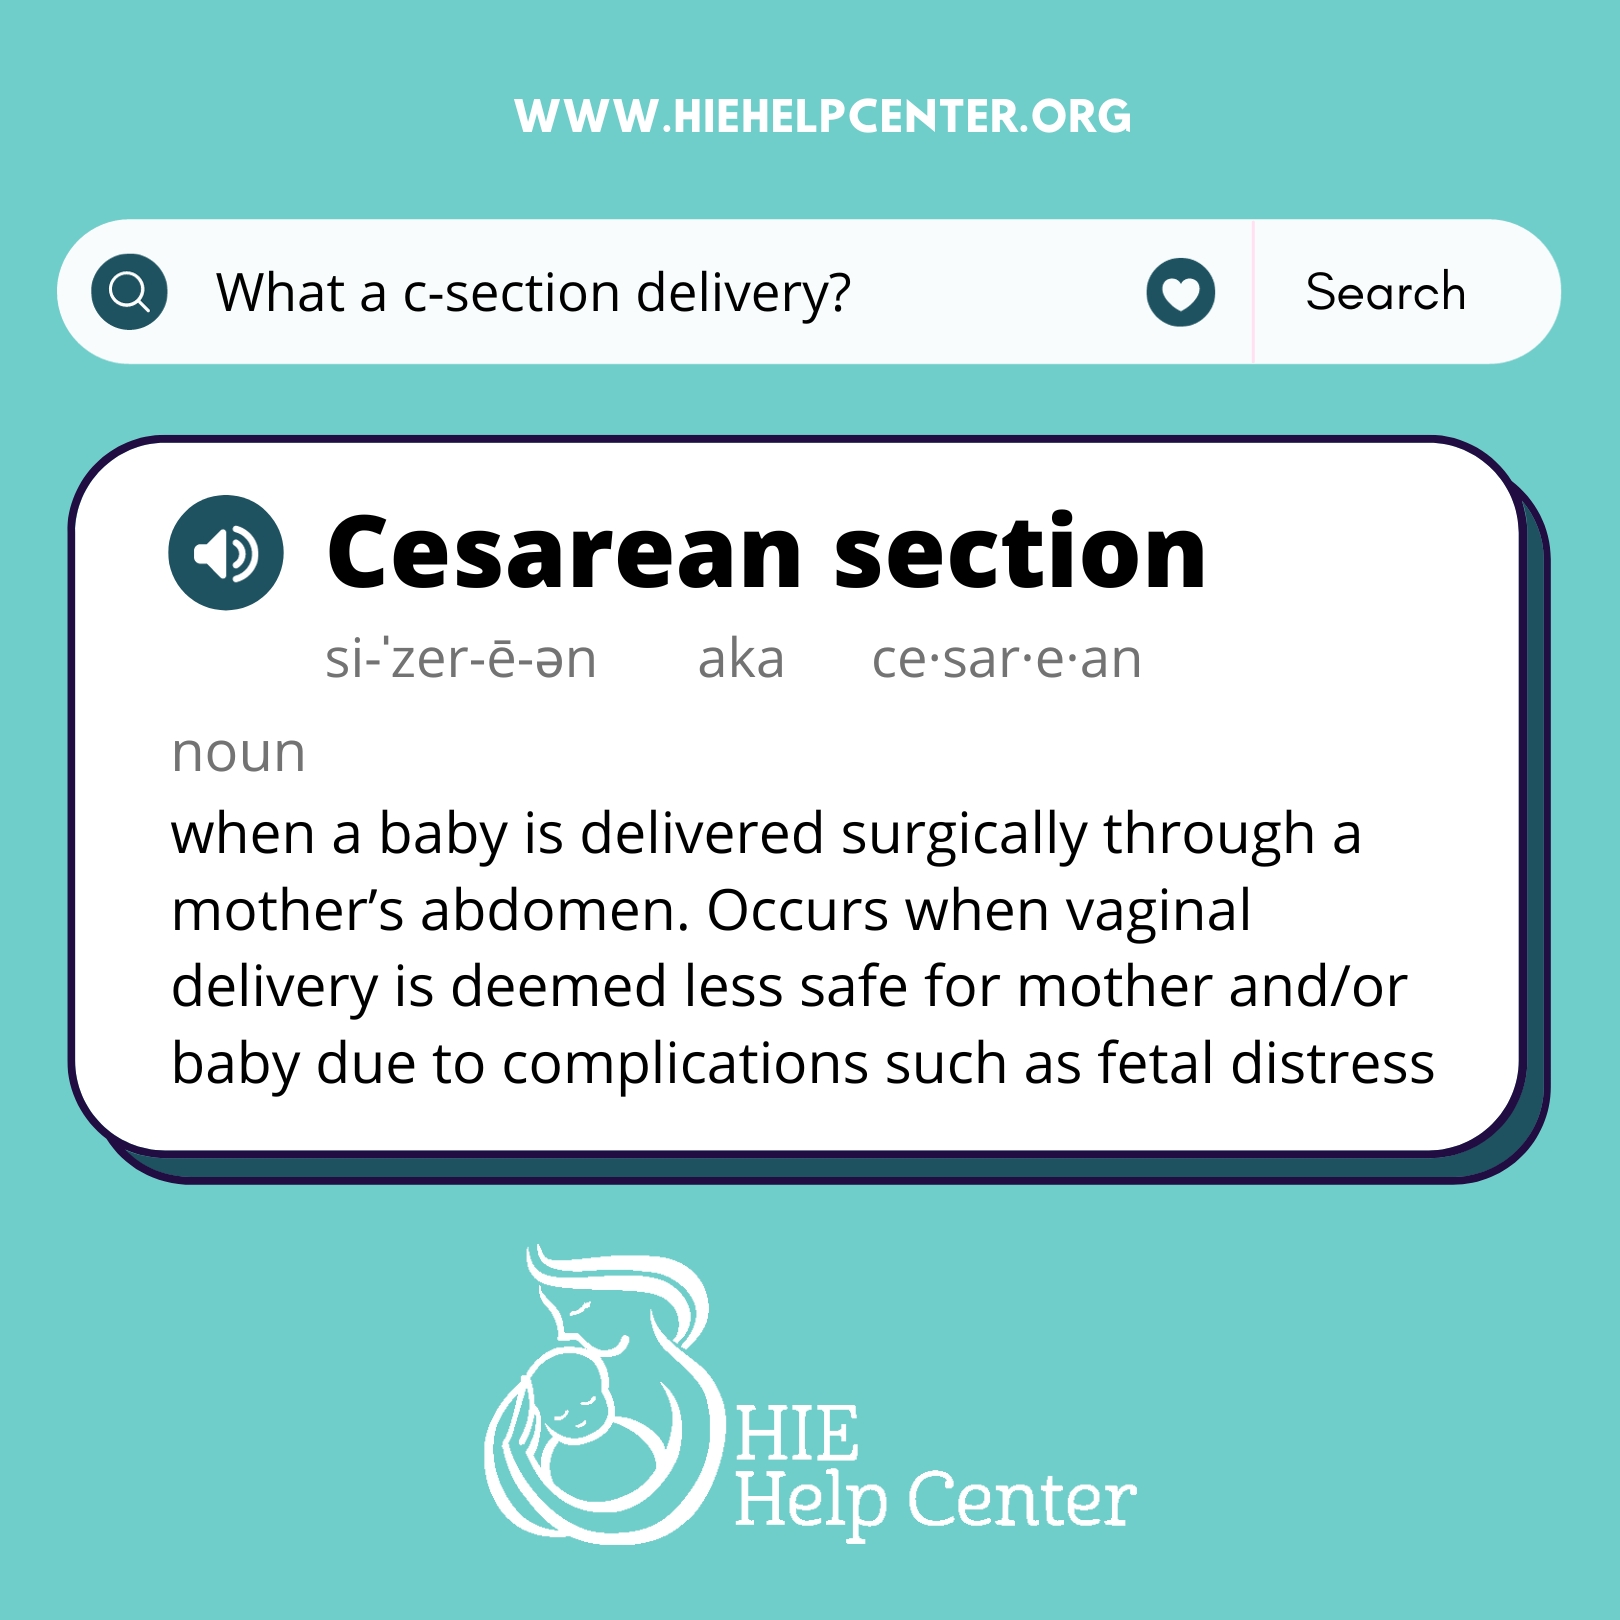 C-Section Infections: Signs, Prevention, and Treatment